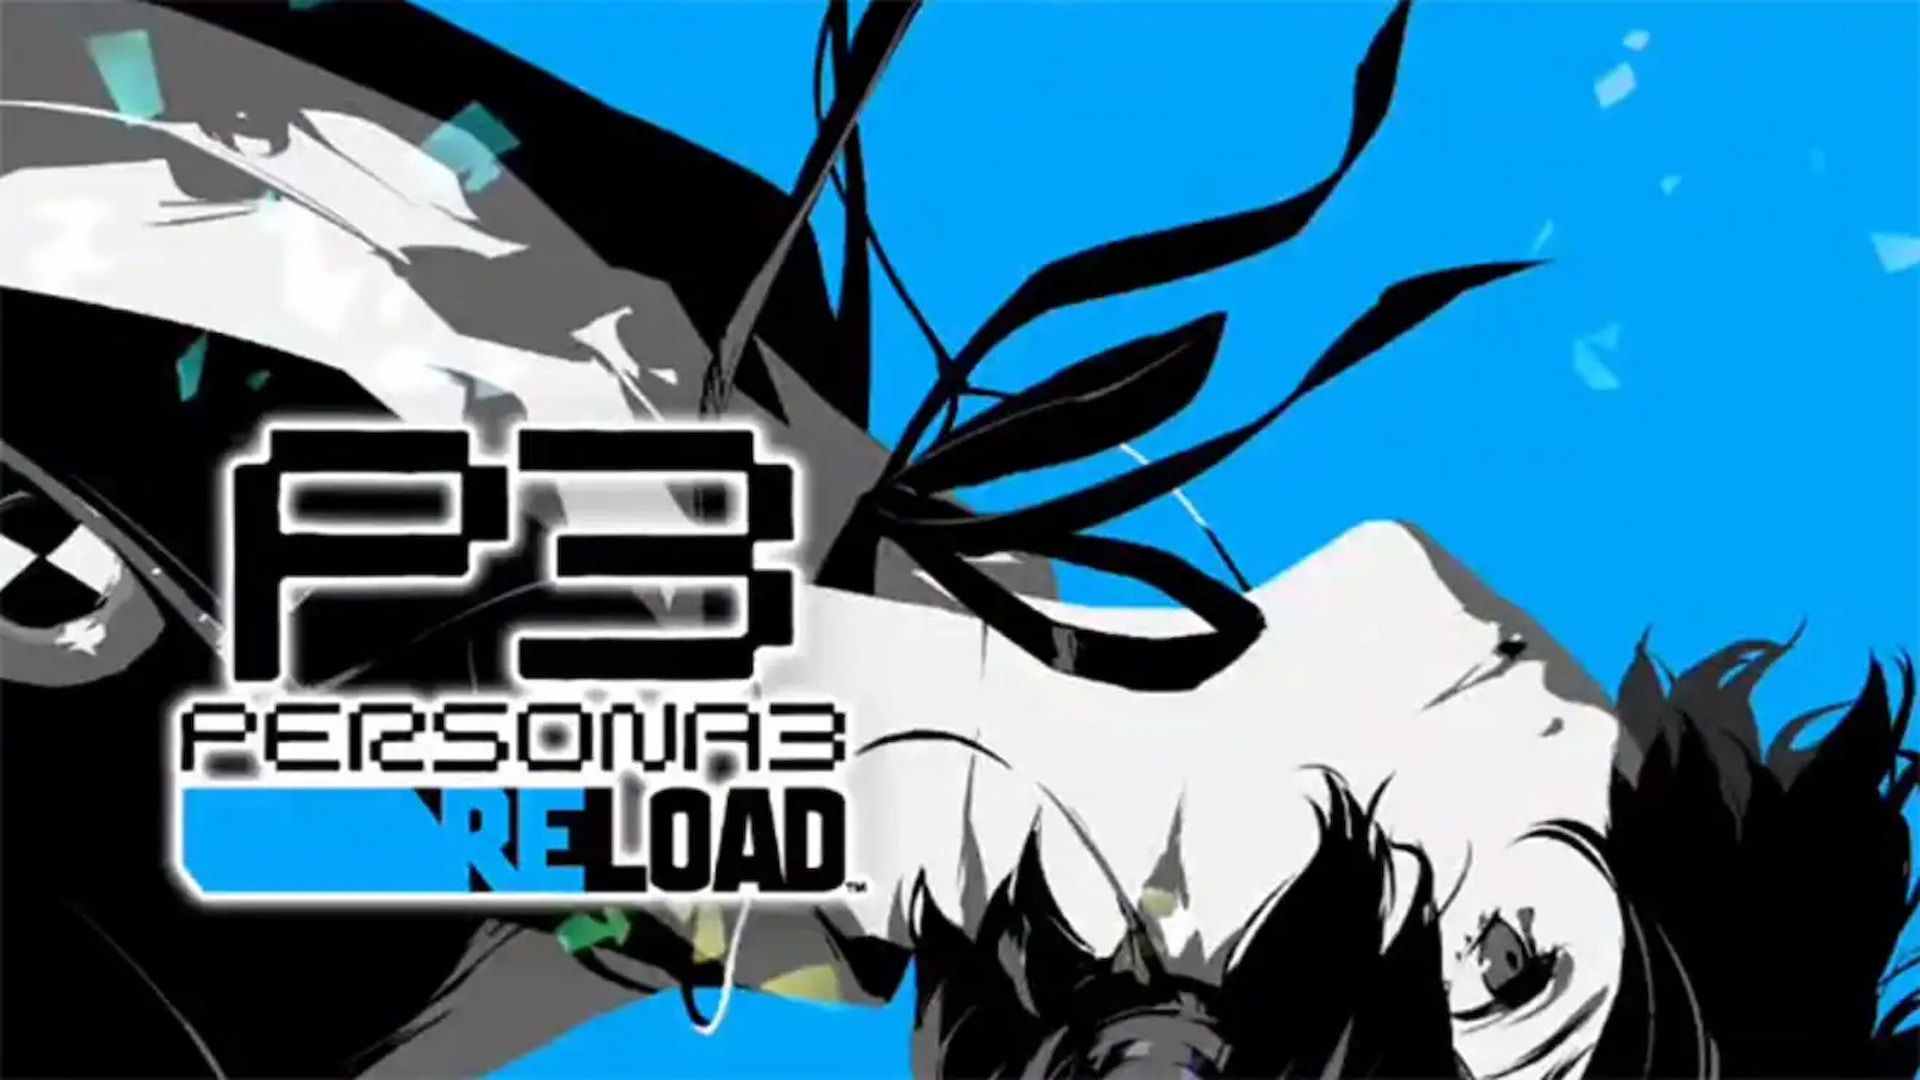  Persona 3 Reload Hintergrundbild 1920x1080. Persona 3 Reload and Persona 5 Tactica Revealed Early By Atlus